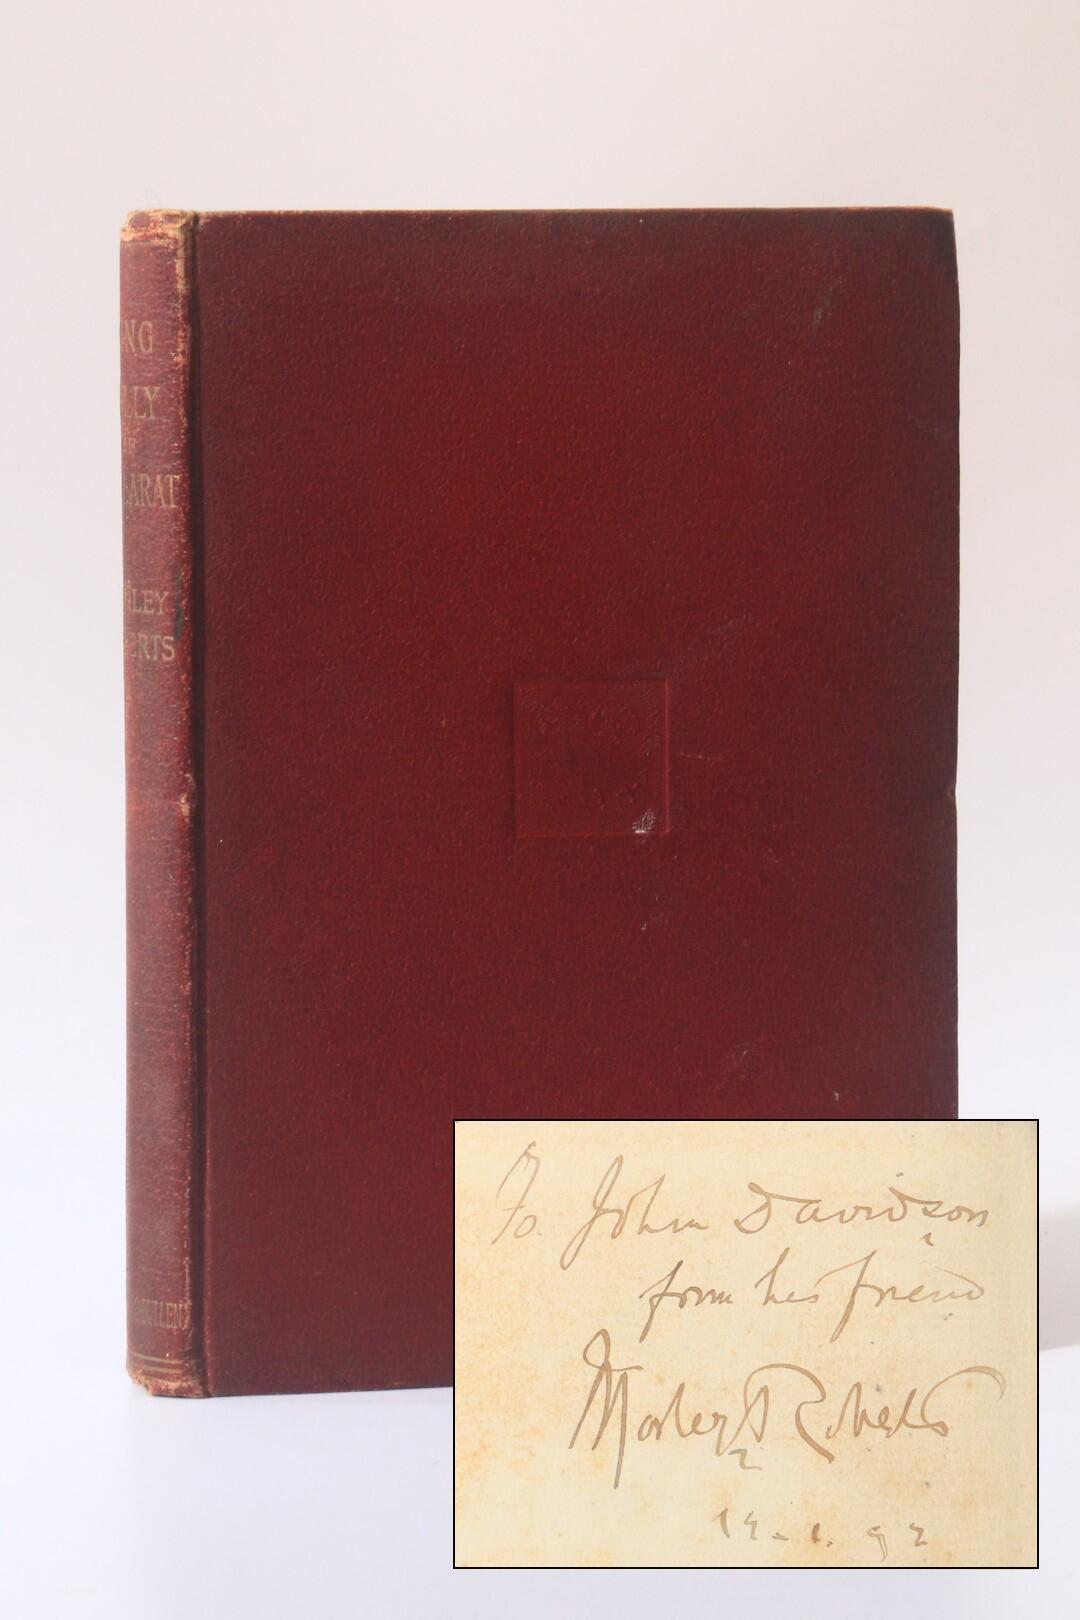 Morley Roberts - King Billy of Ballarat - Lawrence & Bullen, 1892, Signed First Edition.